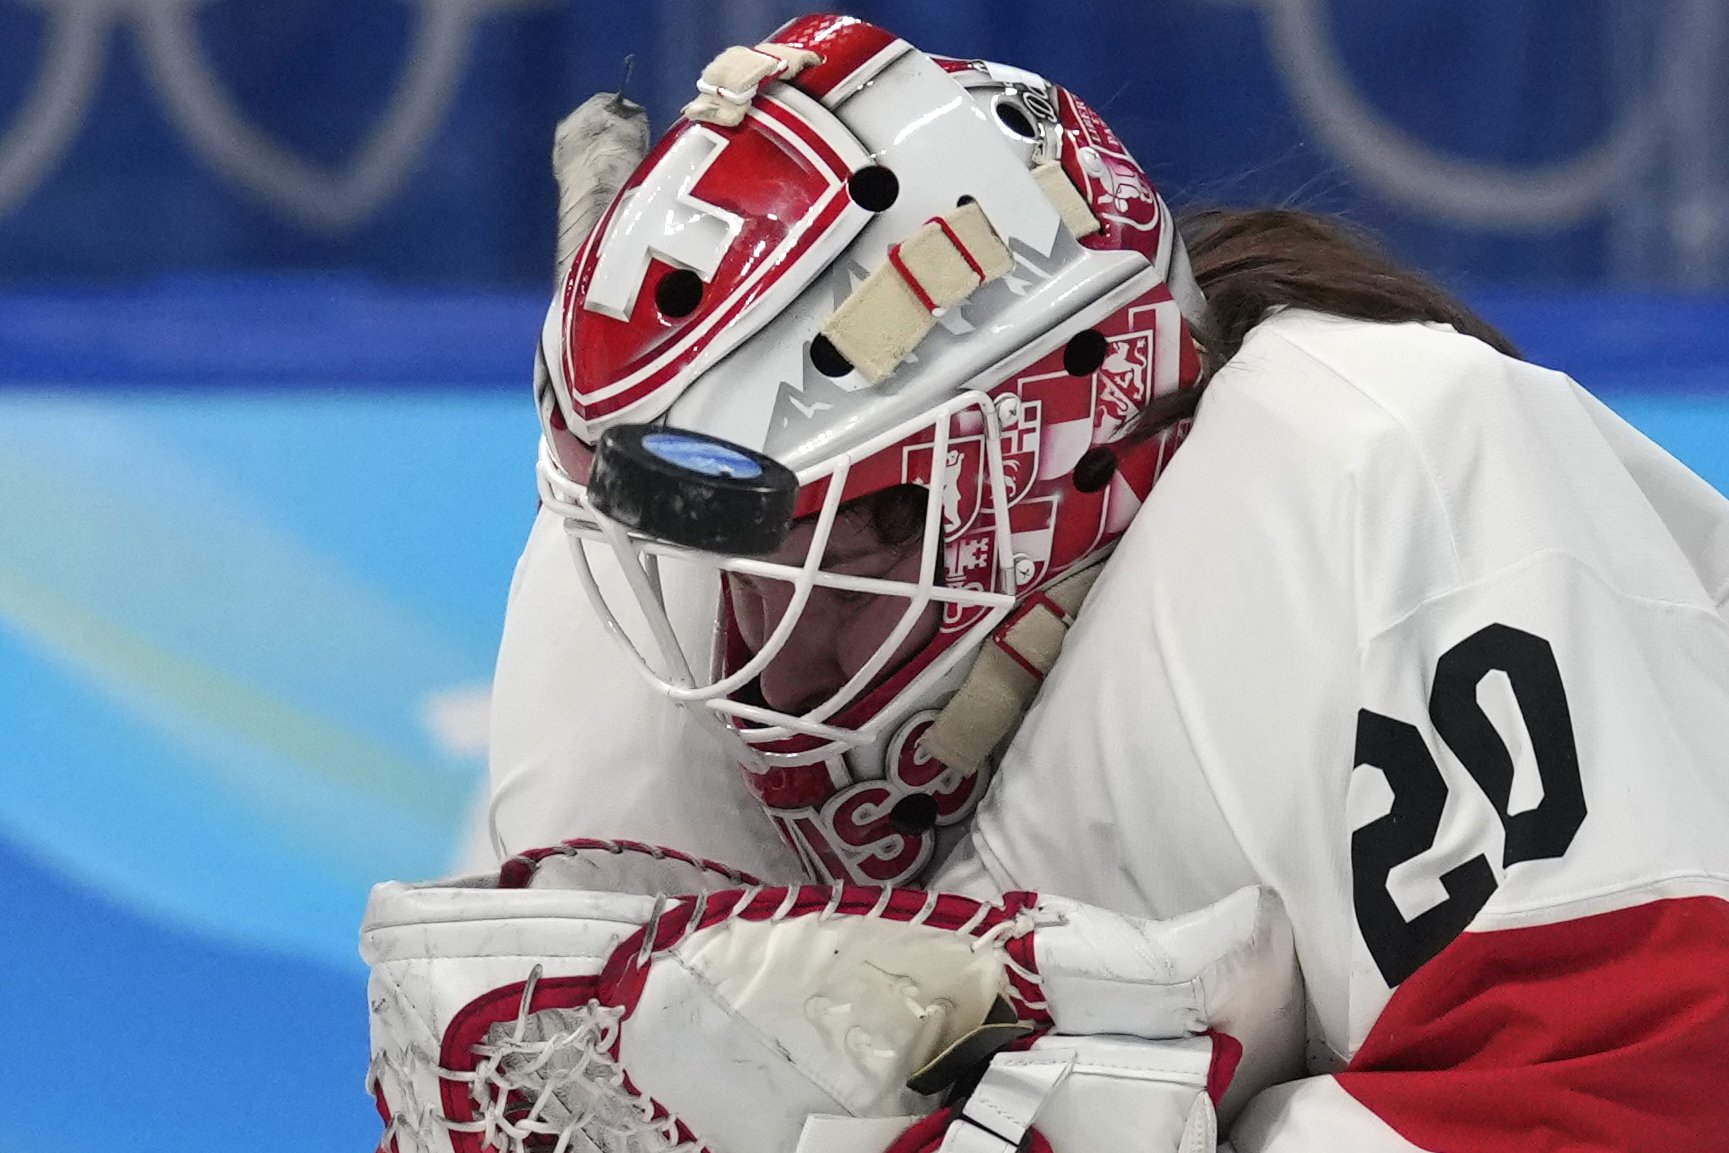  The puck hits the mask of Switzerland goalkeeper Andrea Braendli during the women's bronze medal hockey game against Finland at the 2022 Winter Olympics, Wednesday, Feb. 16, 2022, in Beijing. (AP Photo/Petr David Josek) 